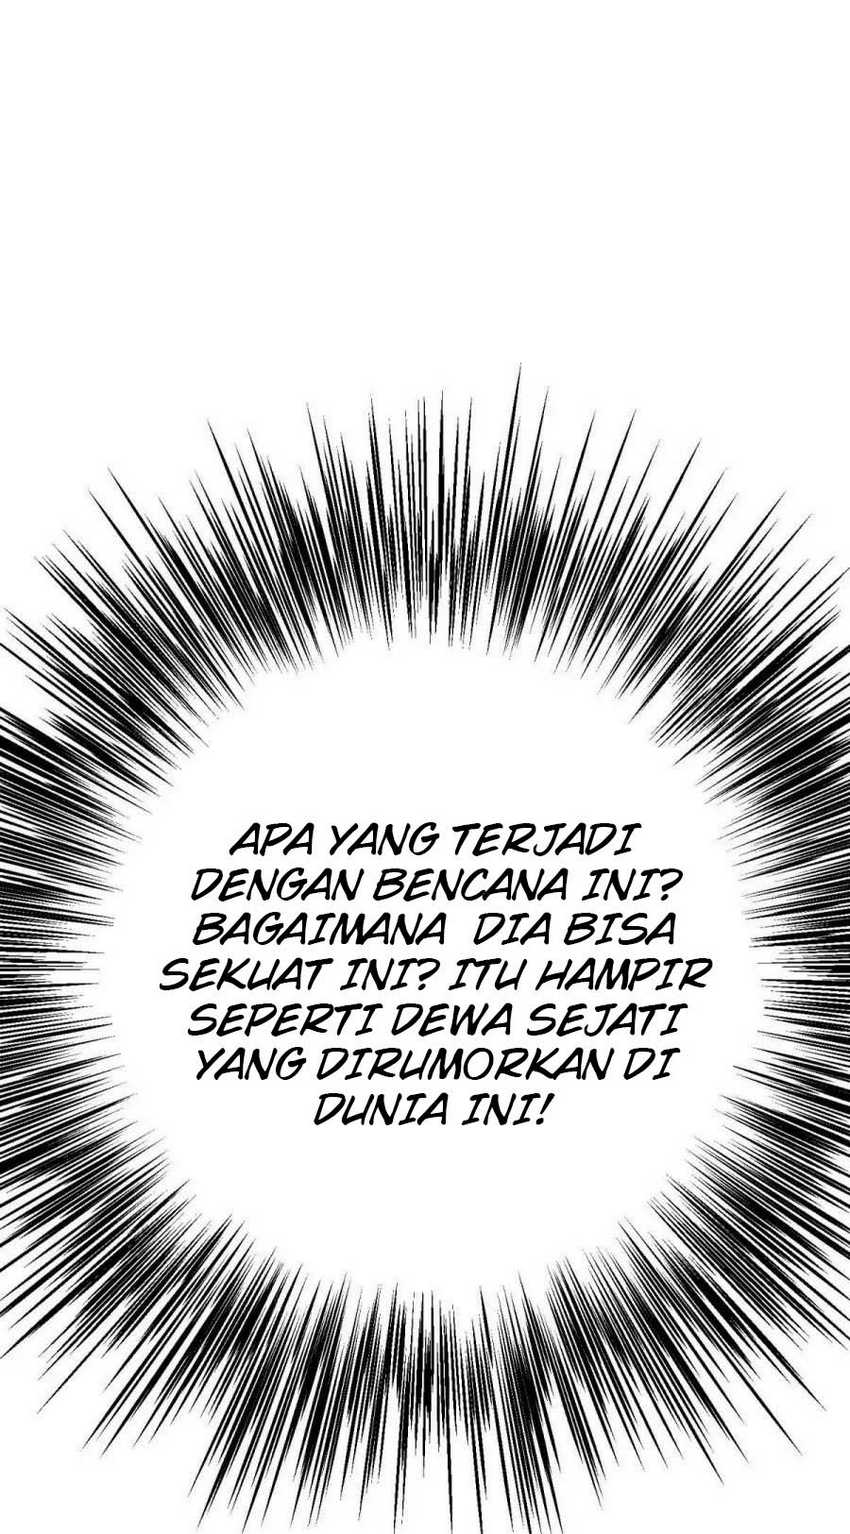 Xianzun System in the City Chapter 104